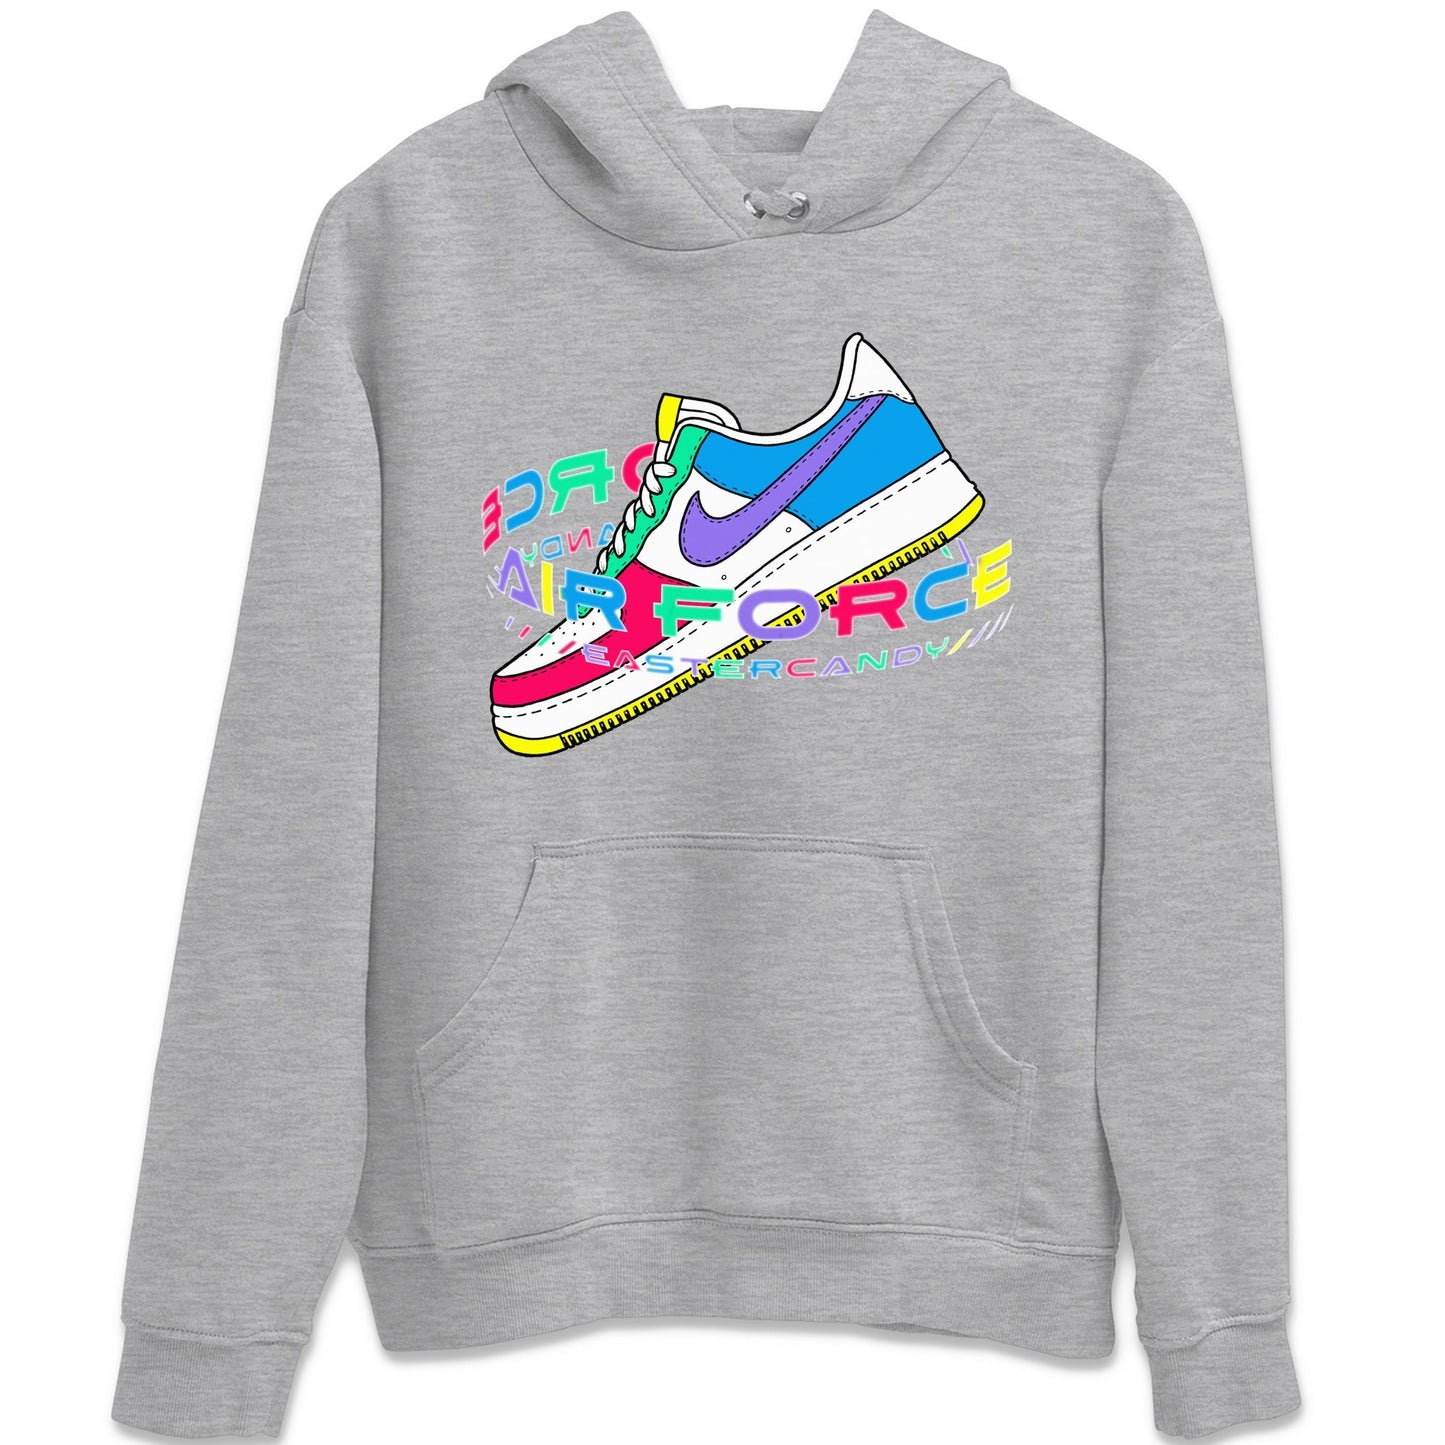 Dunk Easter Candy Sneaker Tees Drip Gear Zone Warping Space Sneaker Tees Nike Easter Shirt Unisex Shirts Heather Grey 2